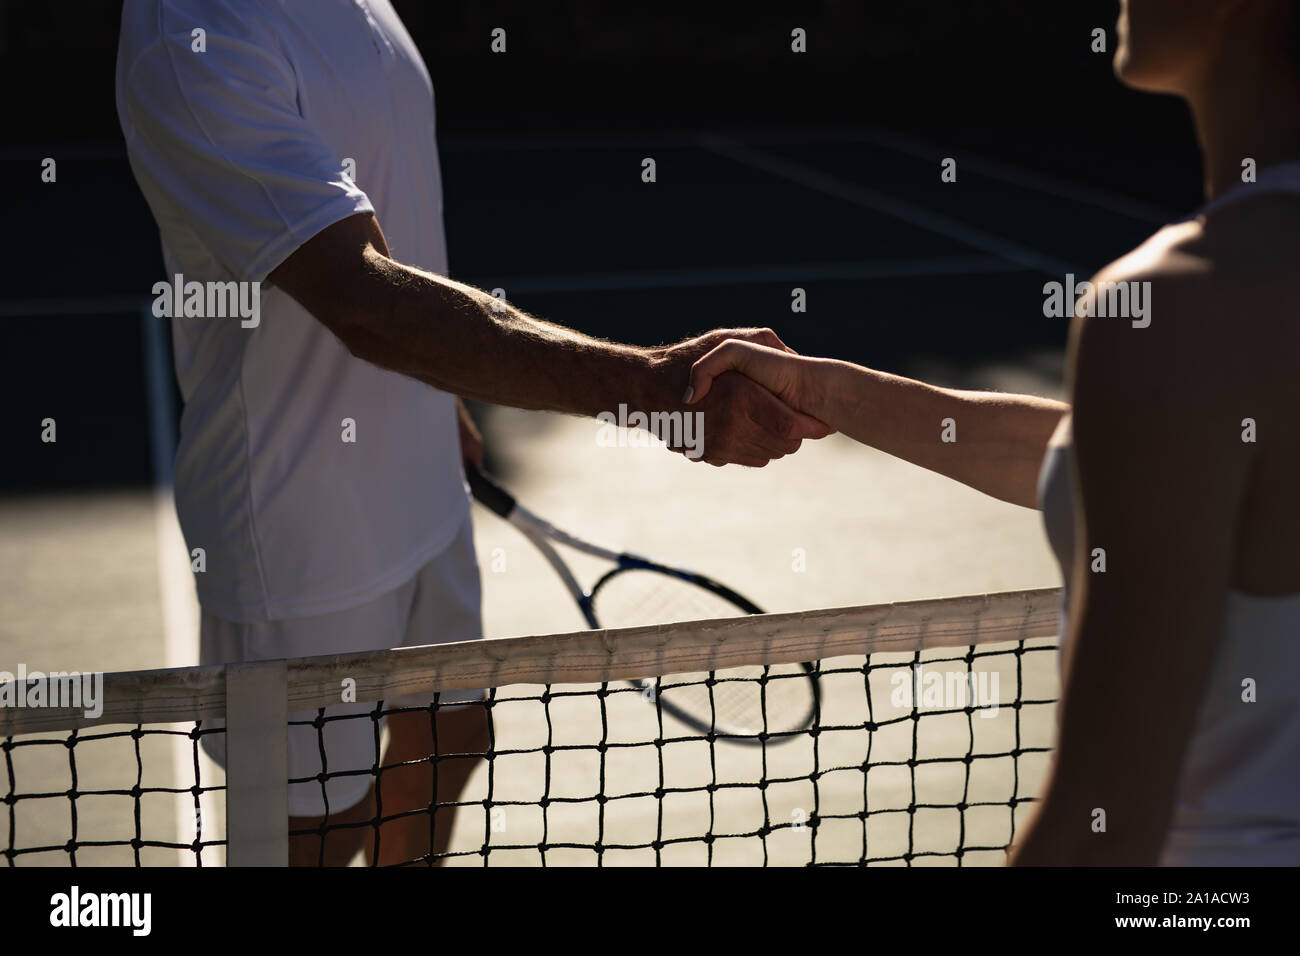 Woman and man shaking hands at a tennis court Stock Photo